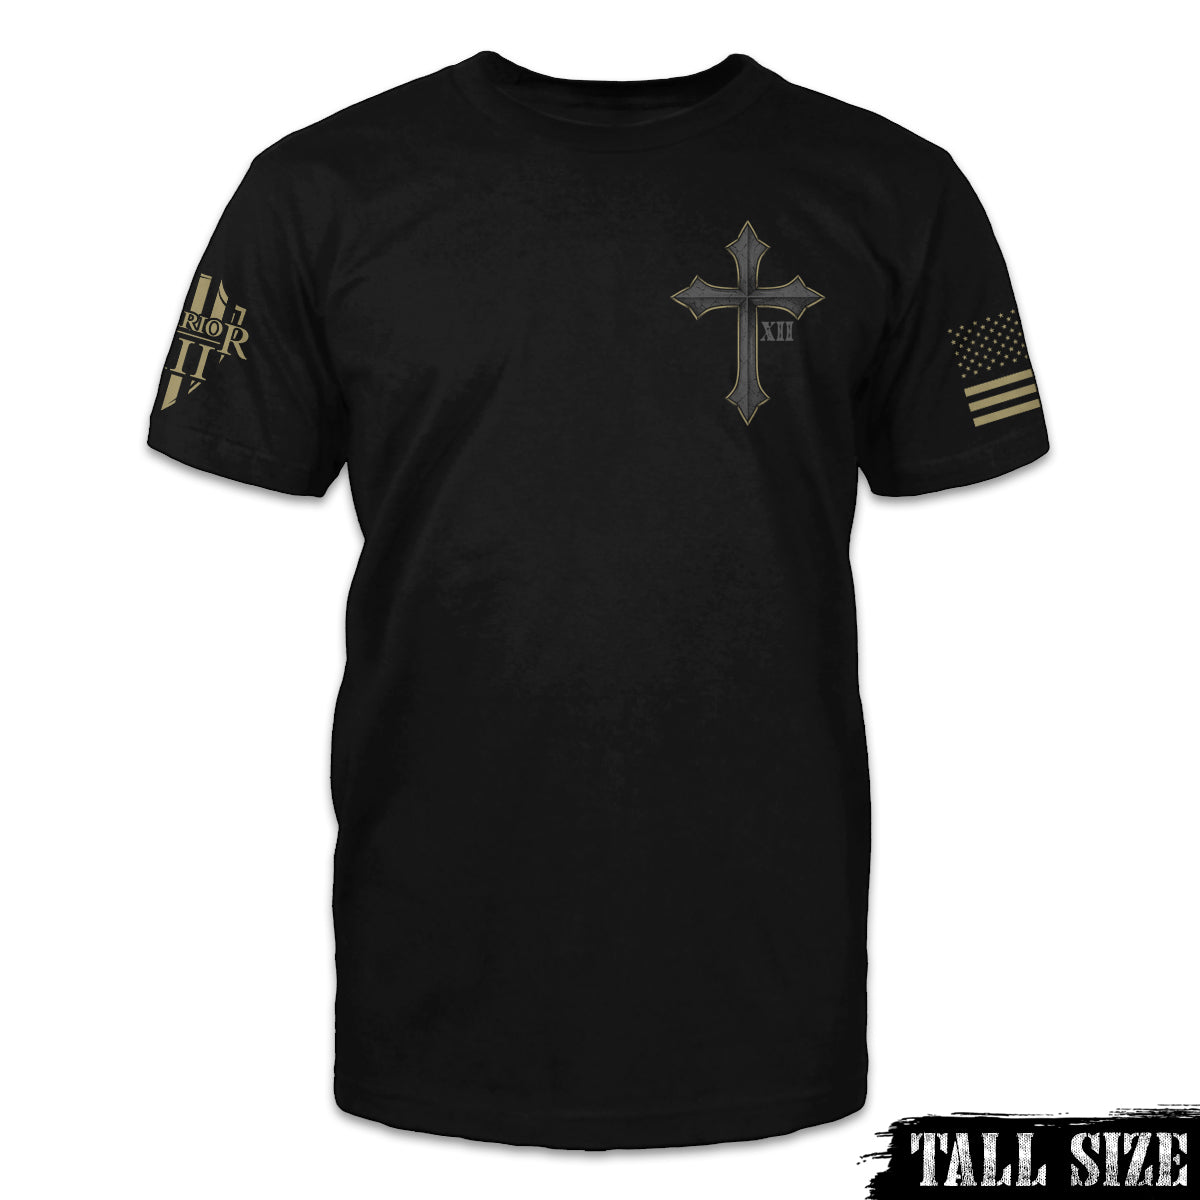 A black tall size shirt with the cross and roman numerals XII printed on the front.